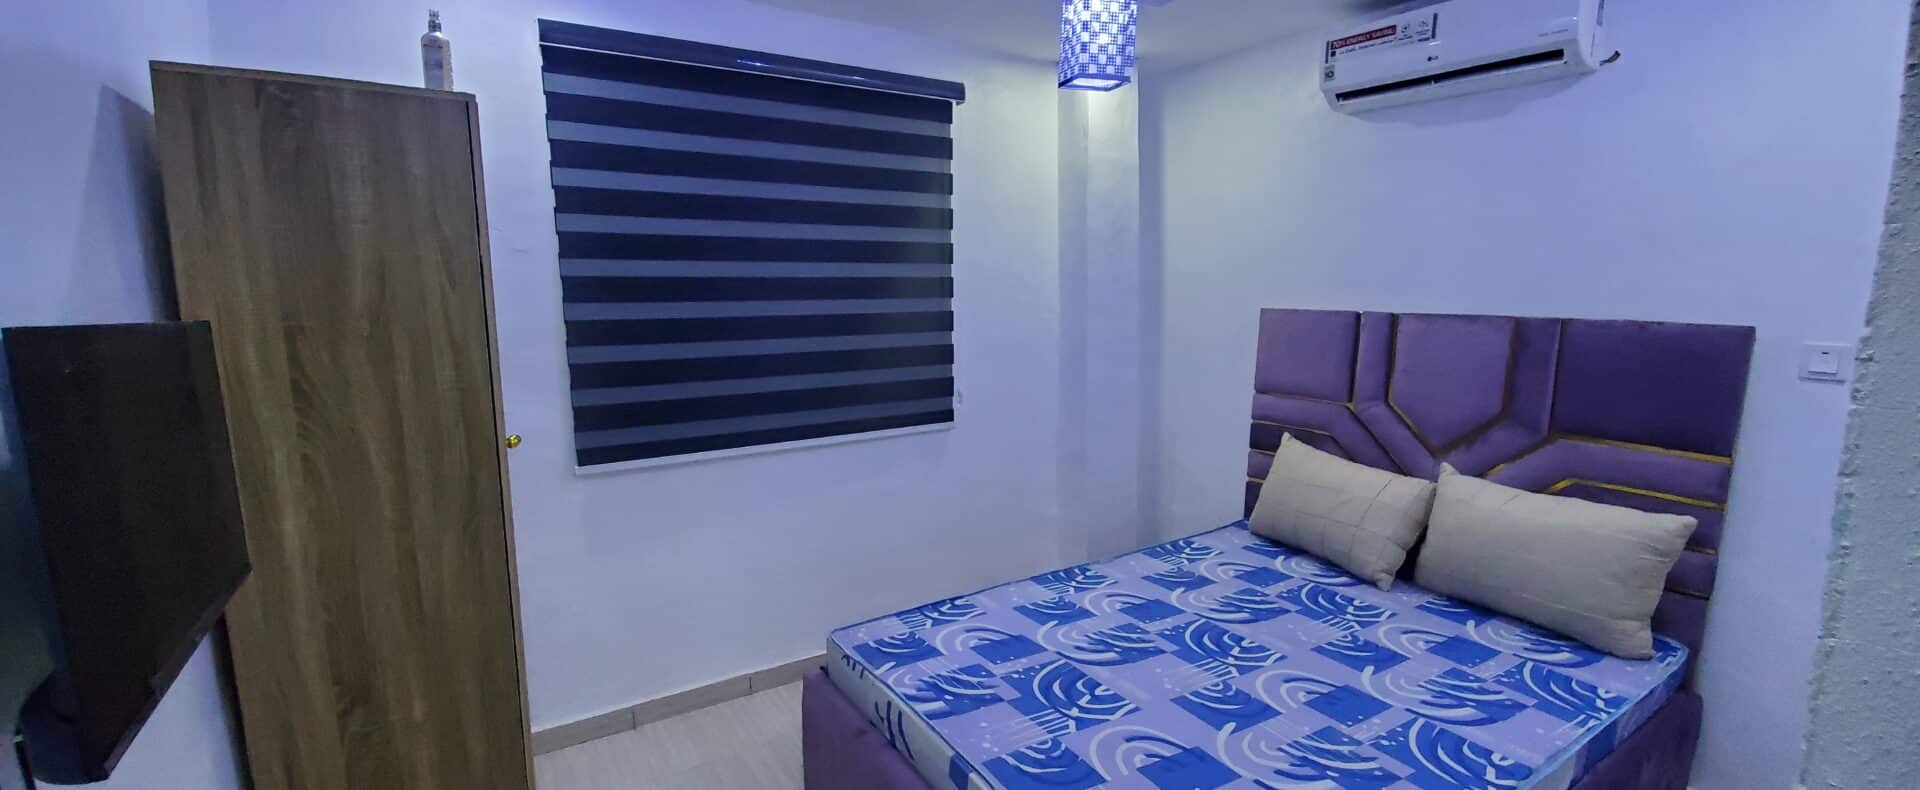 Dinero Diamond One Bedroom Shortlet Apartment The Heart Of Surulere